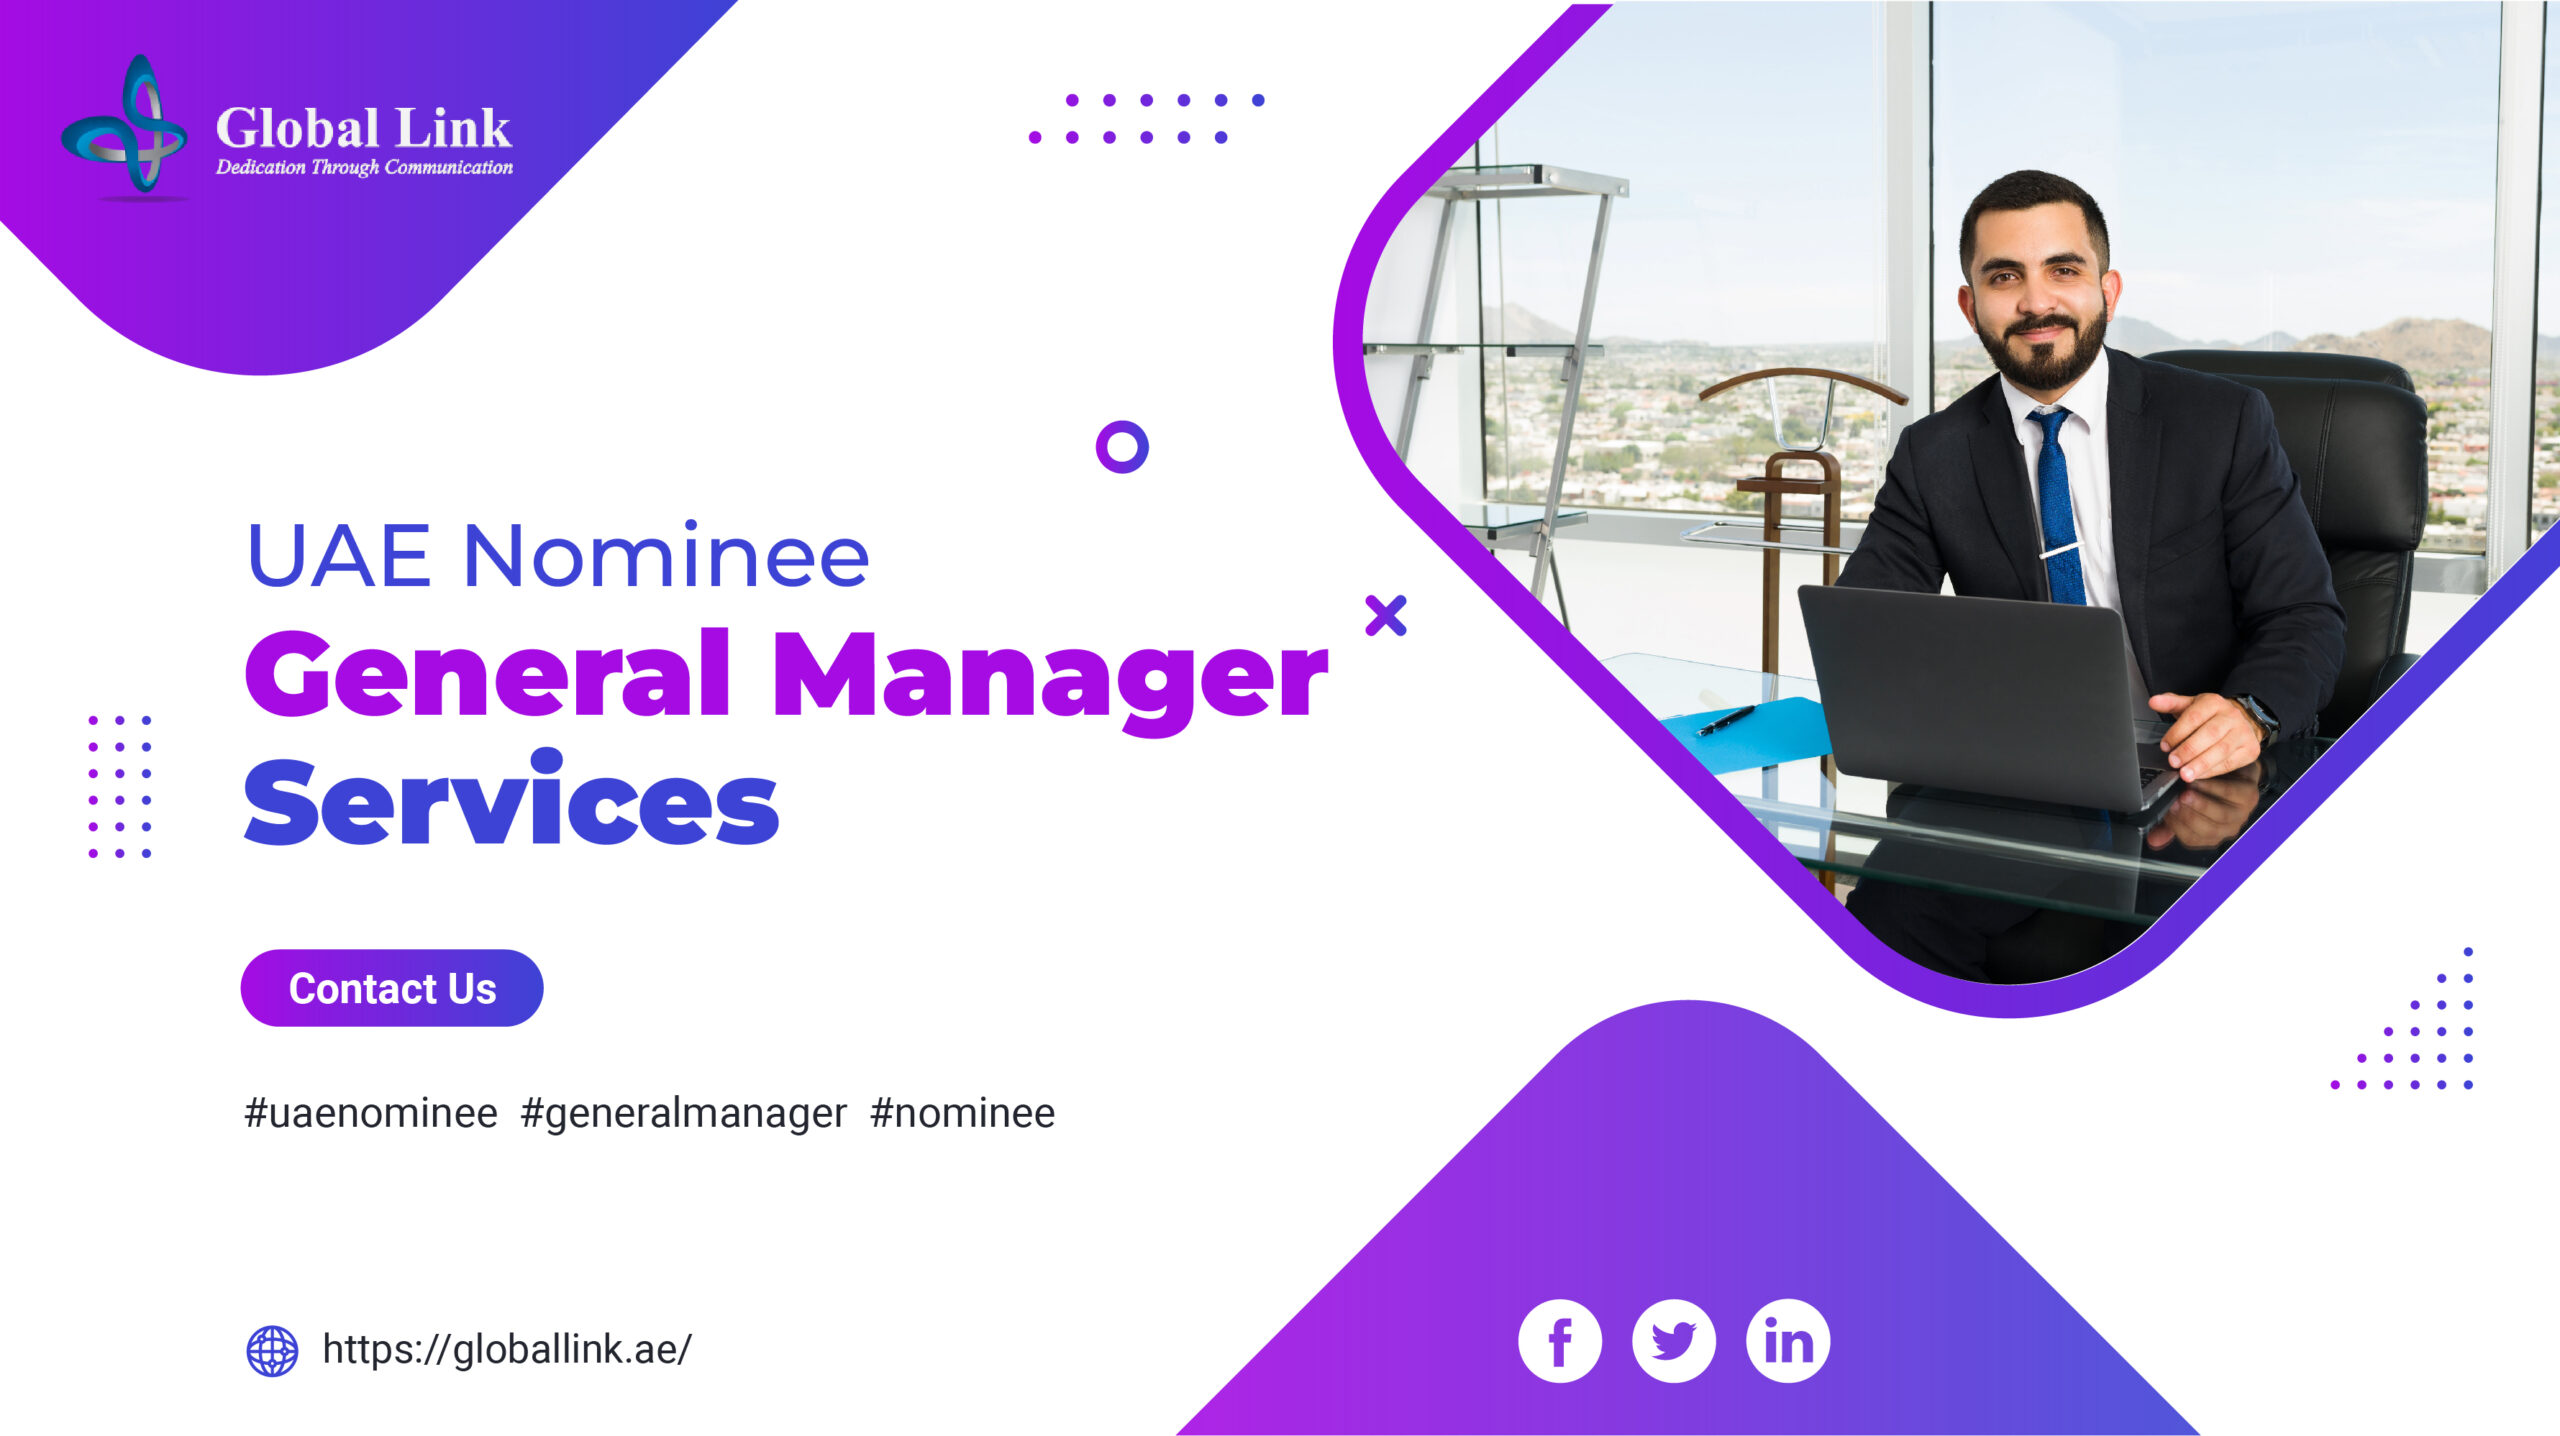 UAE nominee General Manager services